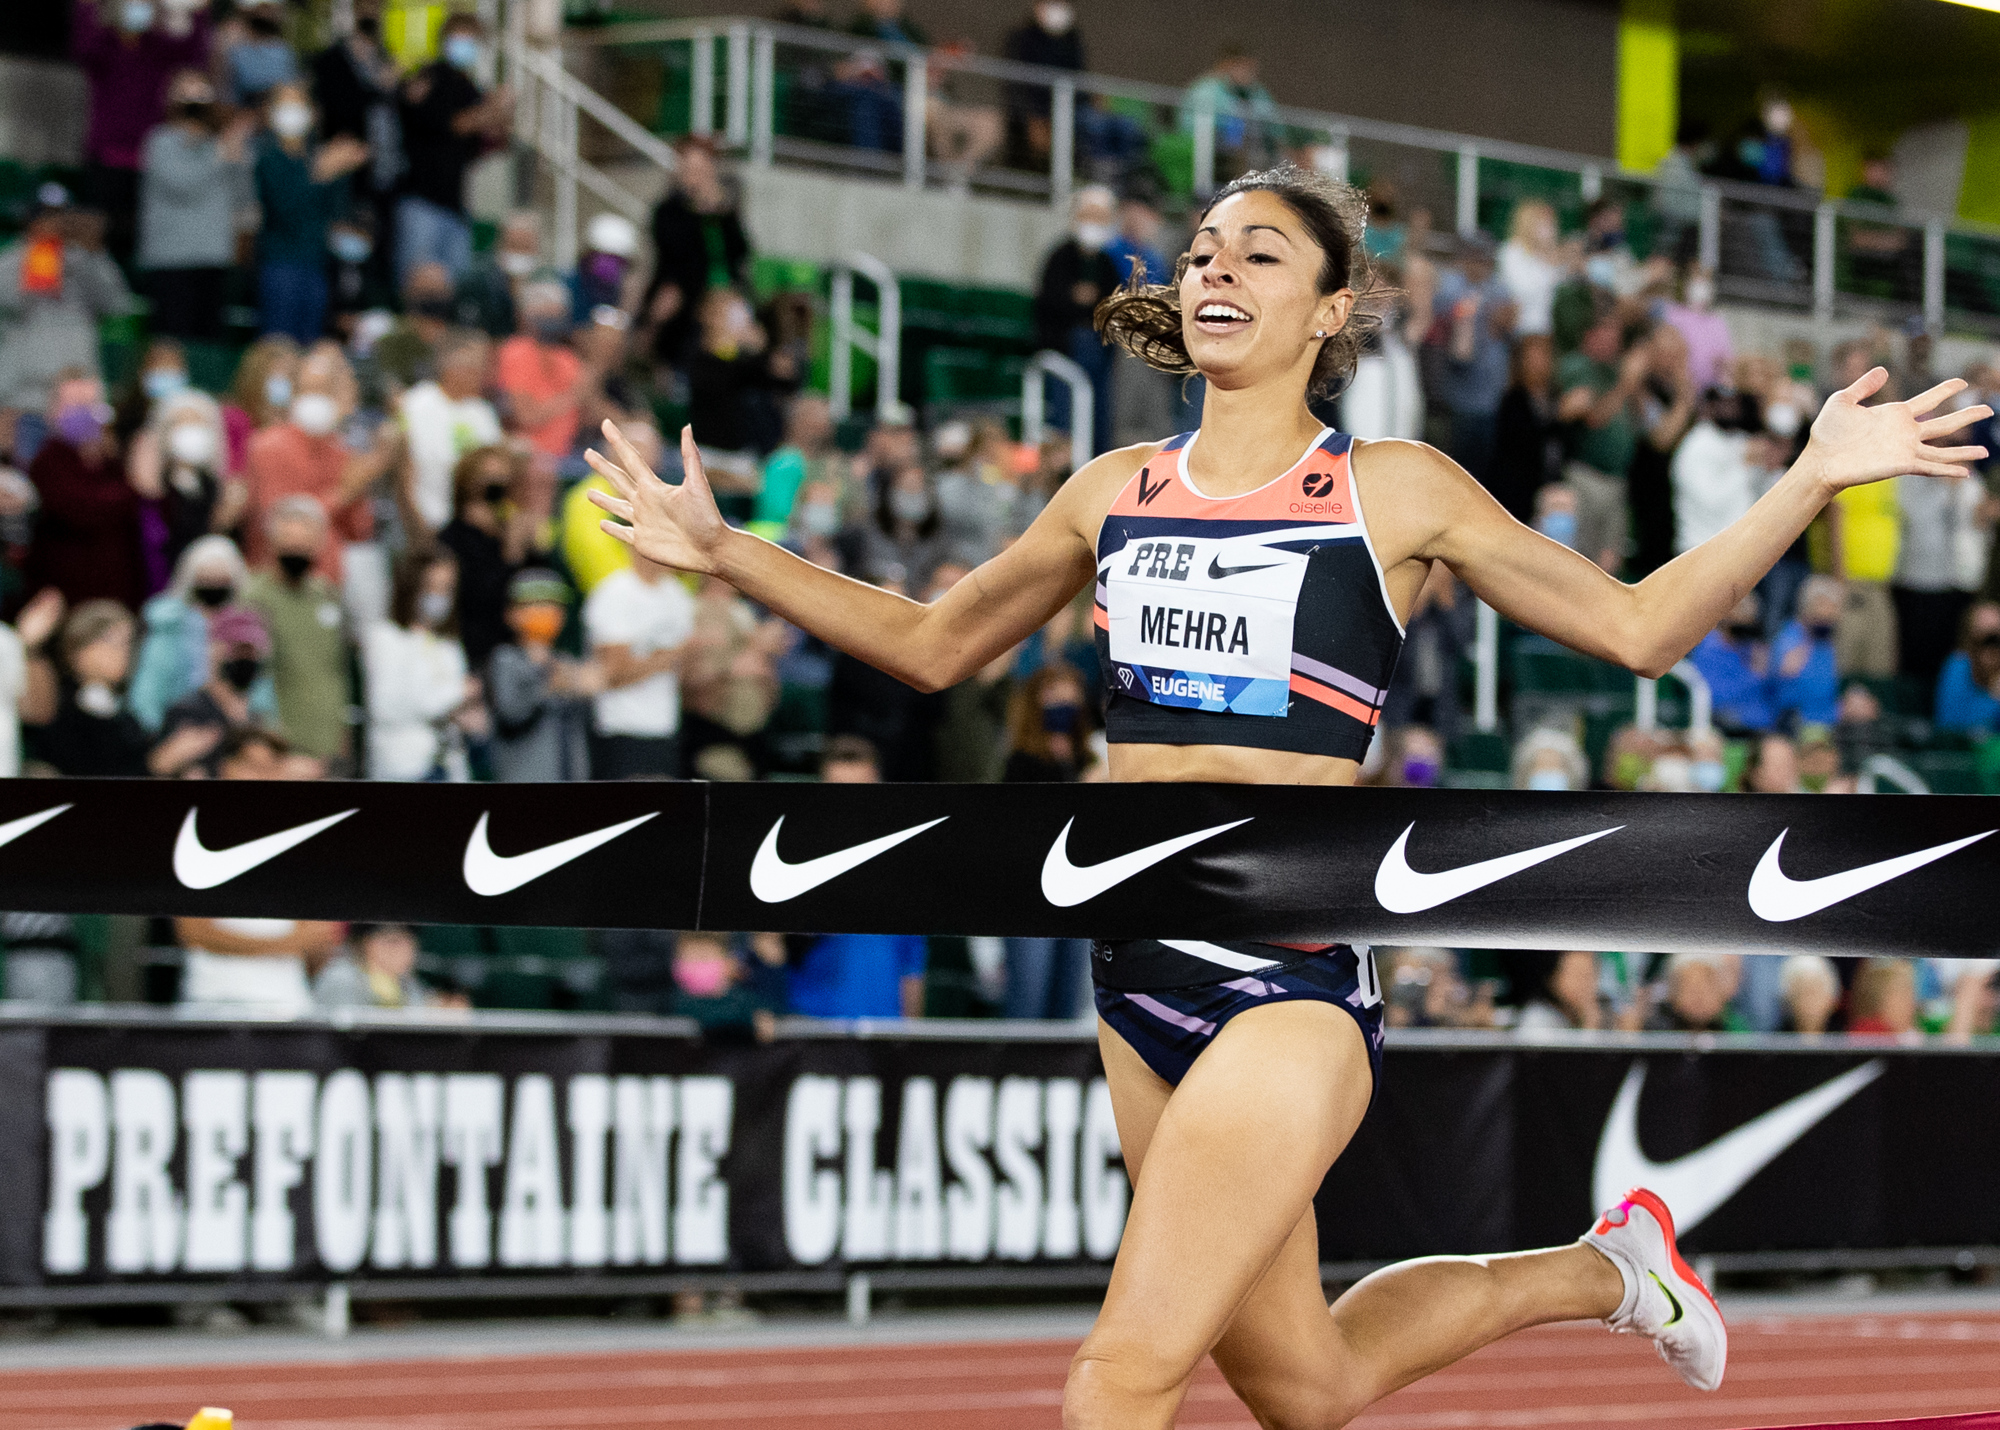 Prefontaine Classic 2021 free live stream, time, schedule, TV channel, how to watch online